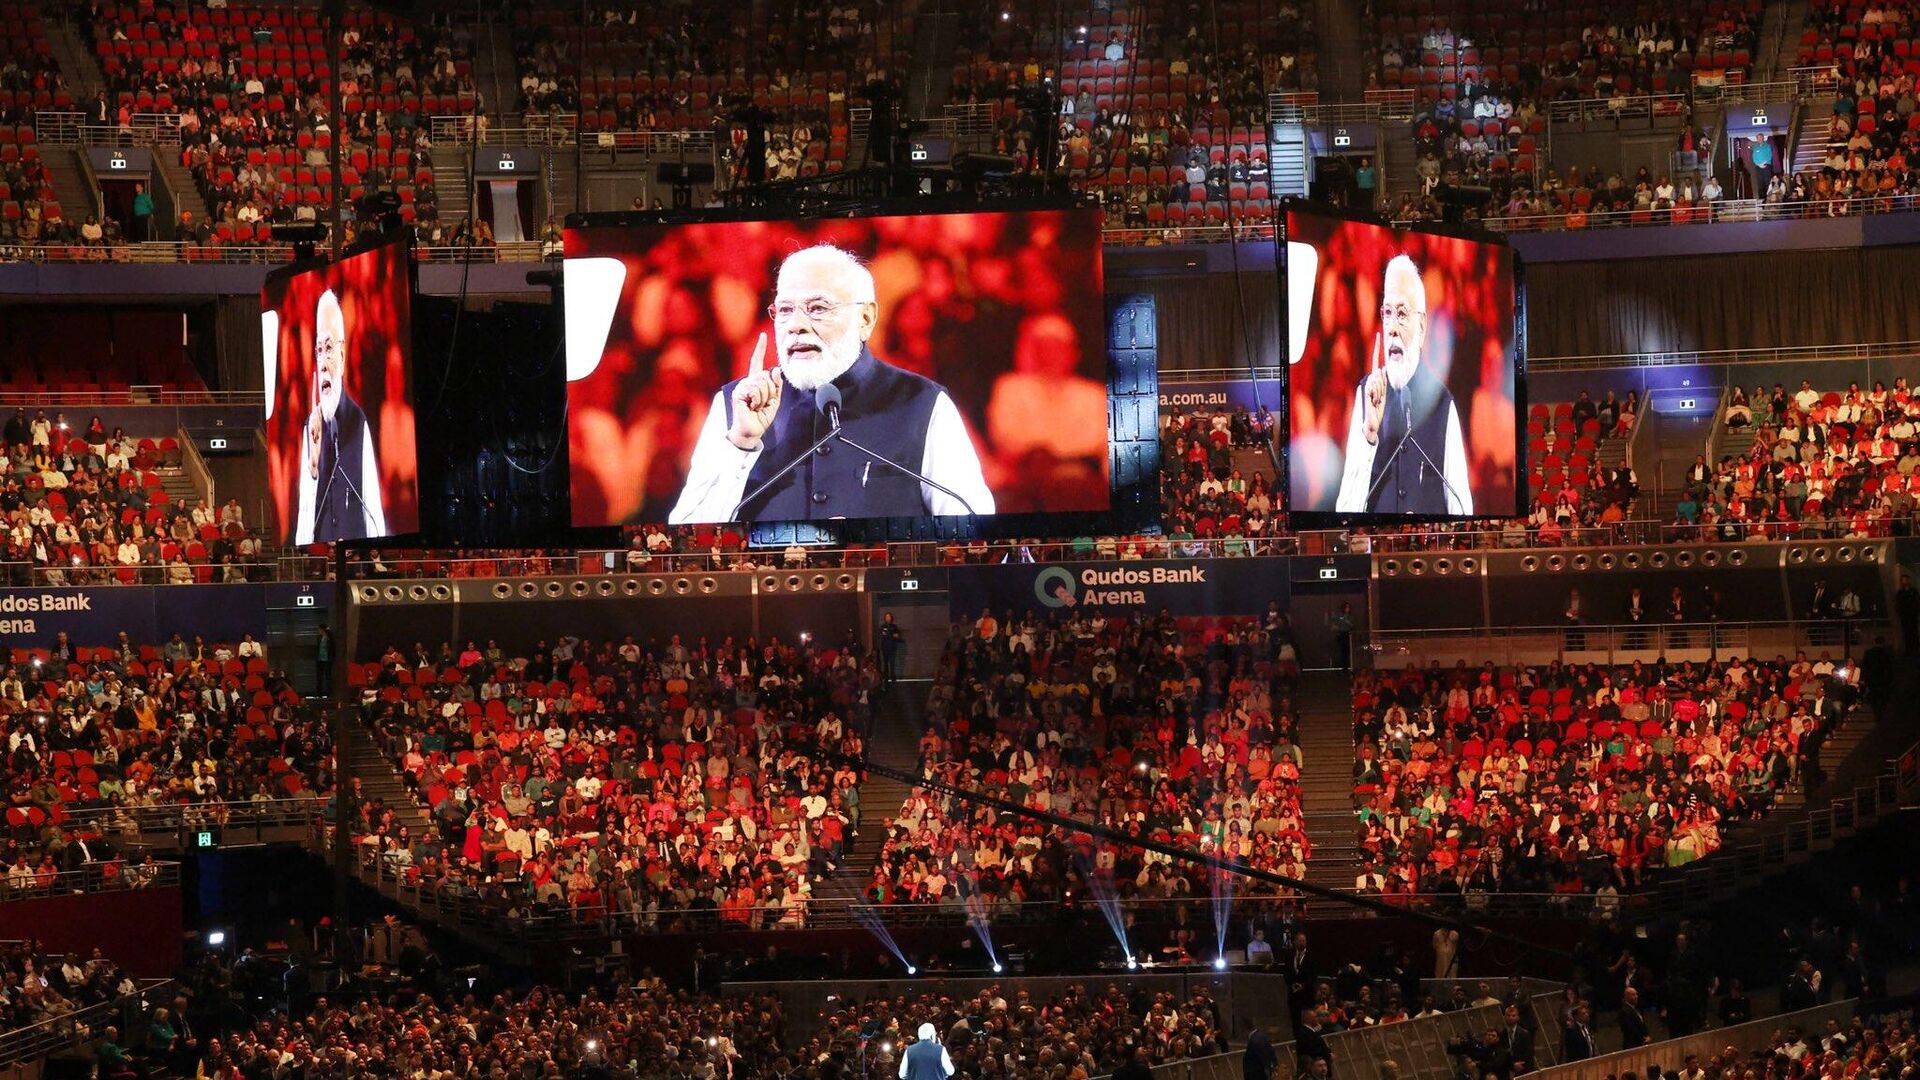 PM Narendra Modi interacts with Indian community at Qudos Bank Arena in Sydney - Sputnik India, 1920, 23.05.2023